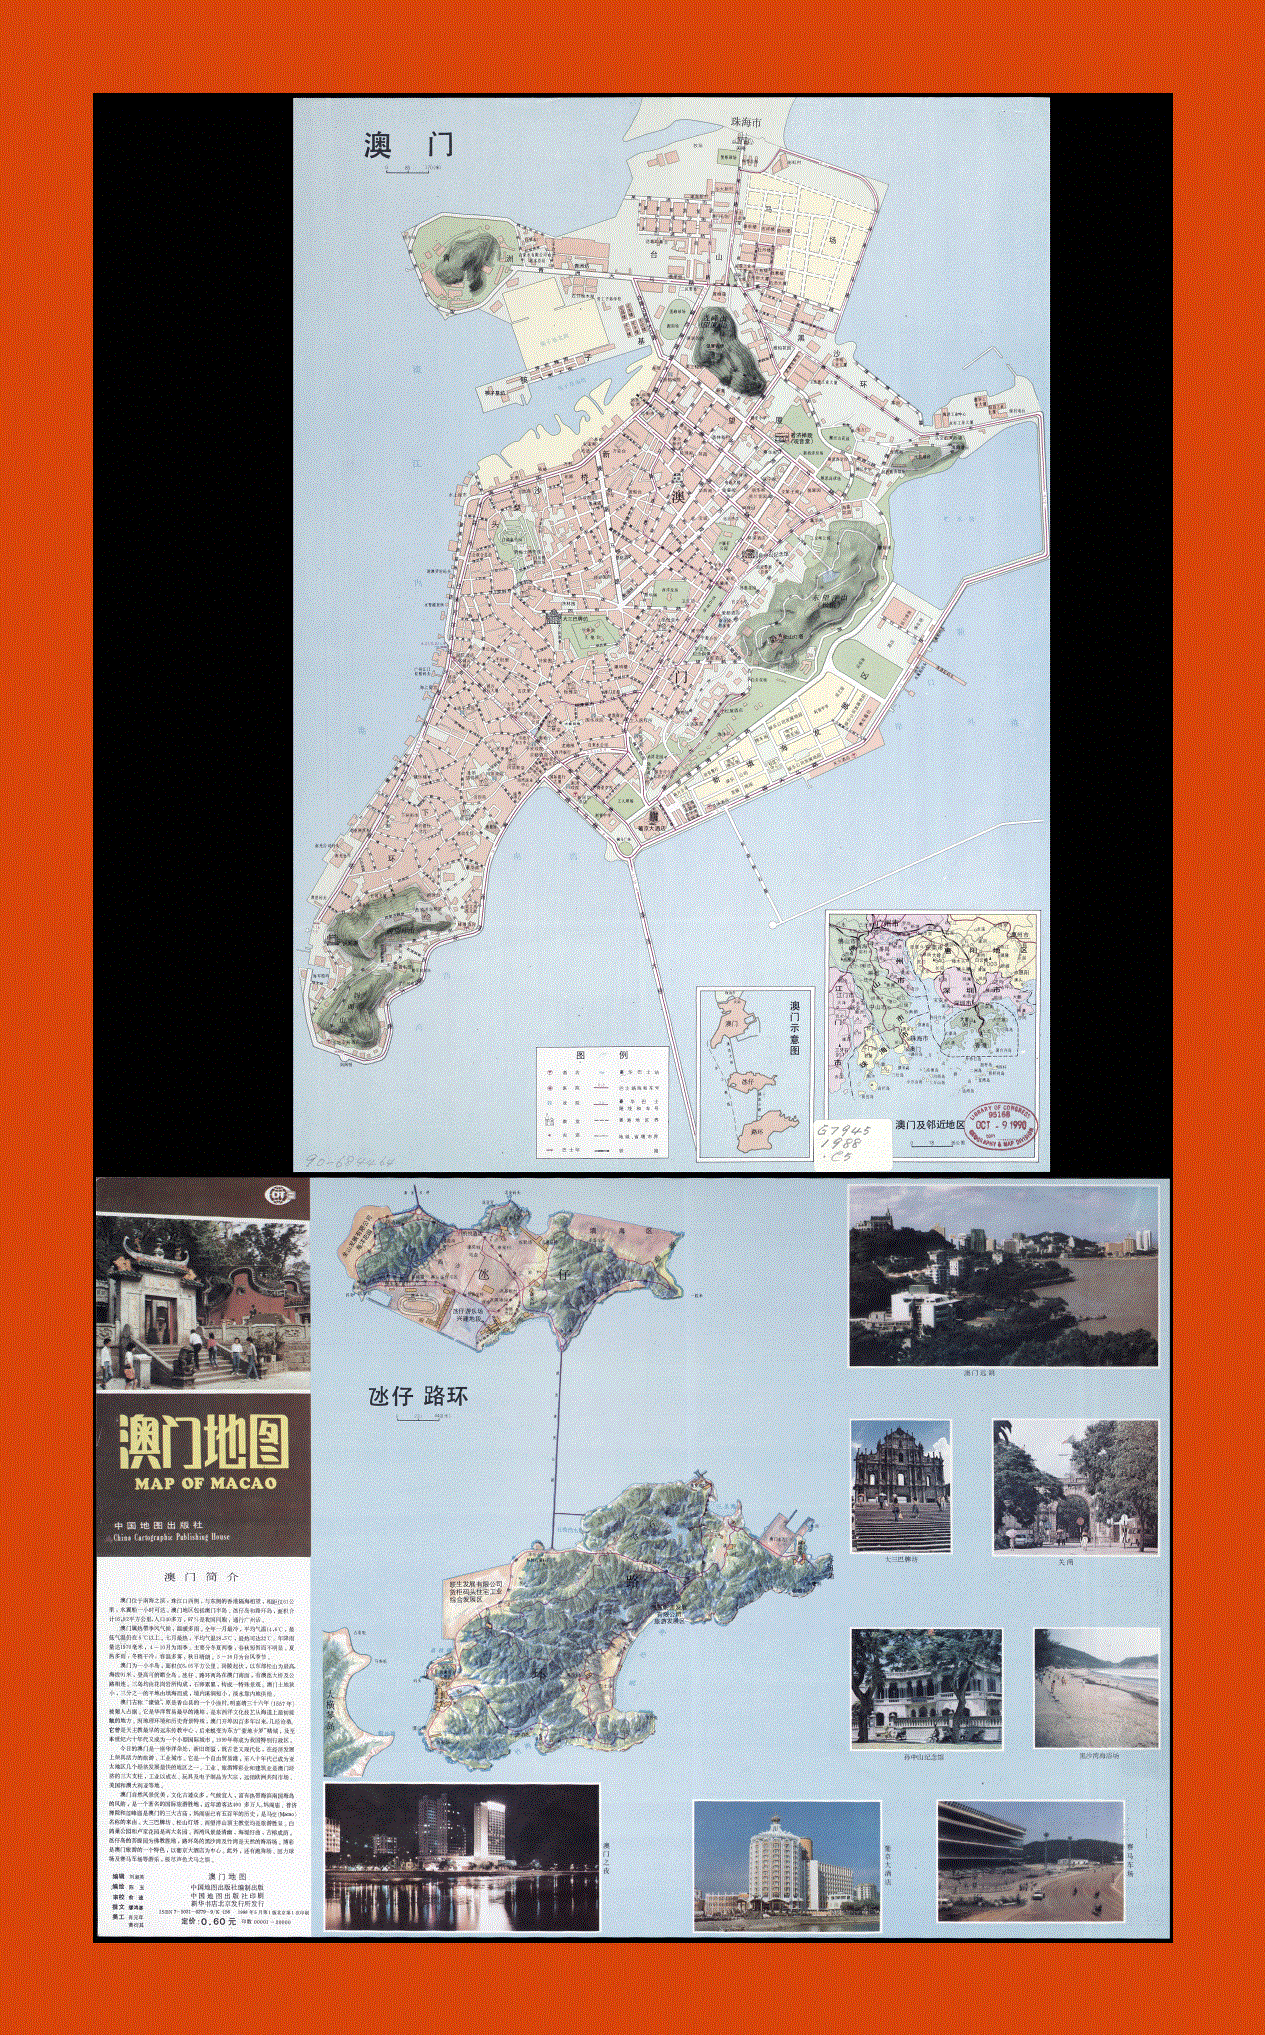 Tourist map of Macau in chinese - 1988